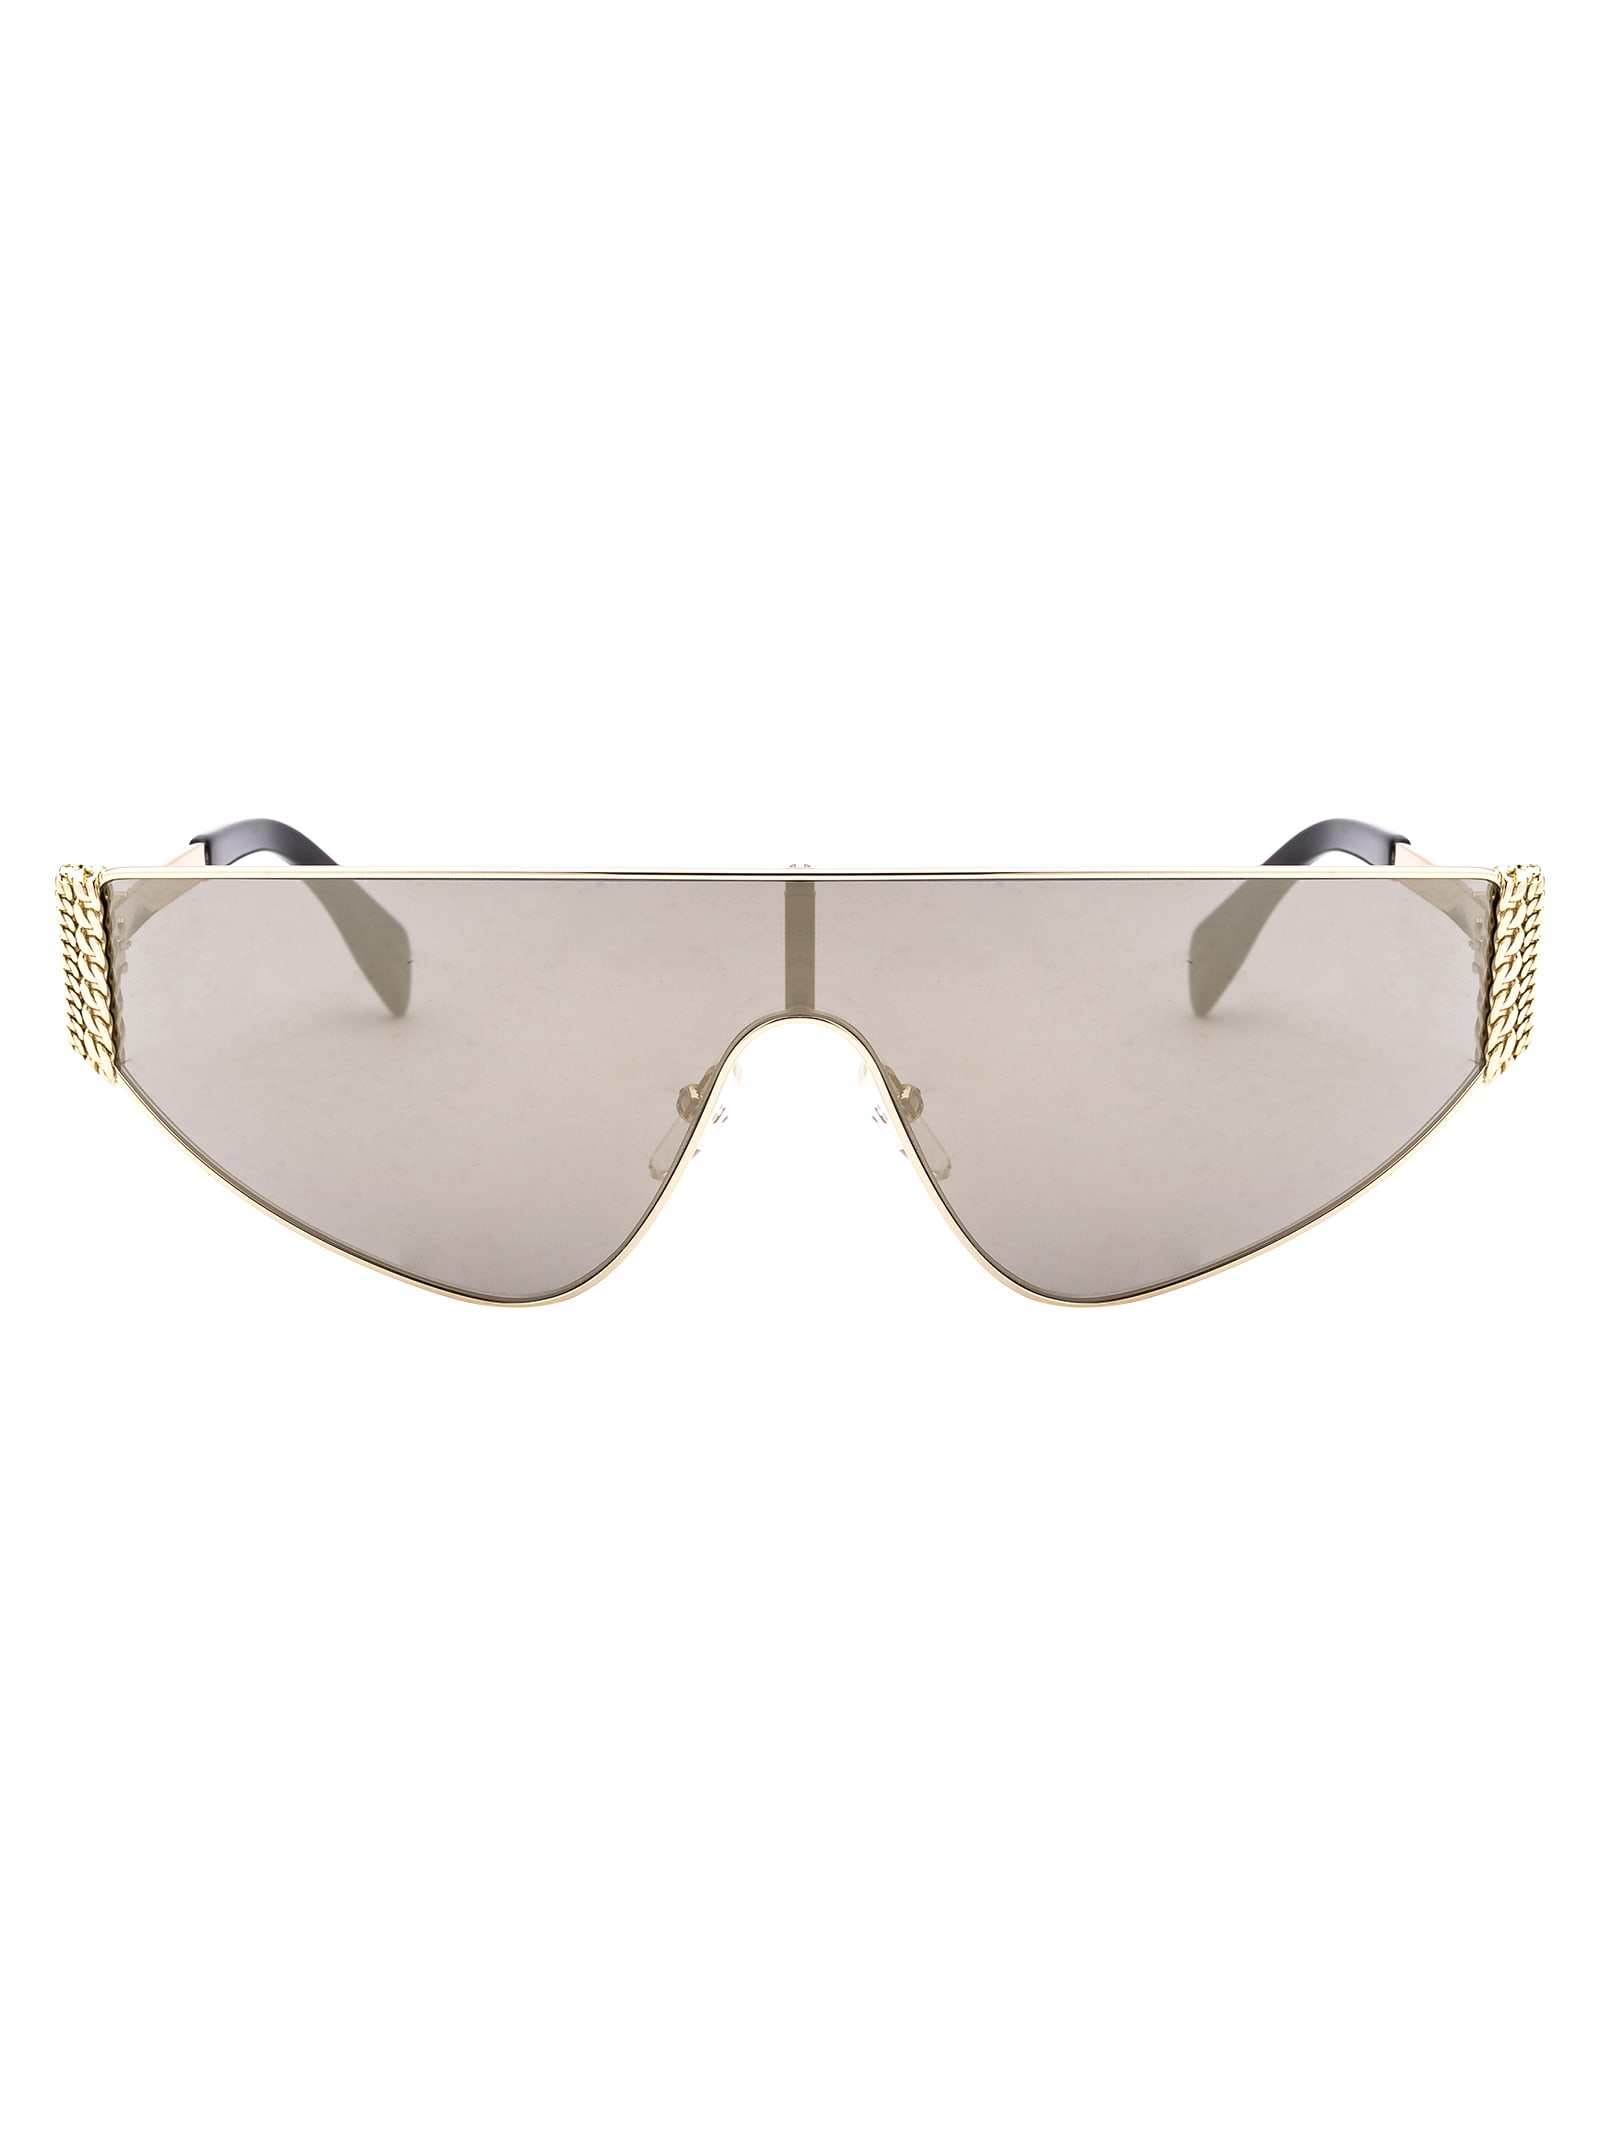 Moschino Mos022/s Sunglasses In J5gue Gold